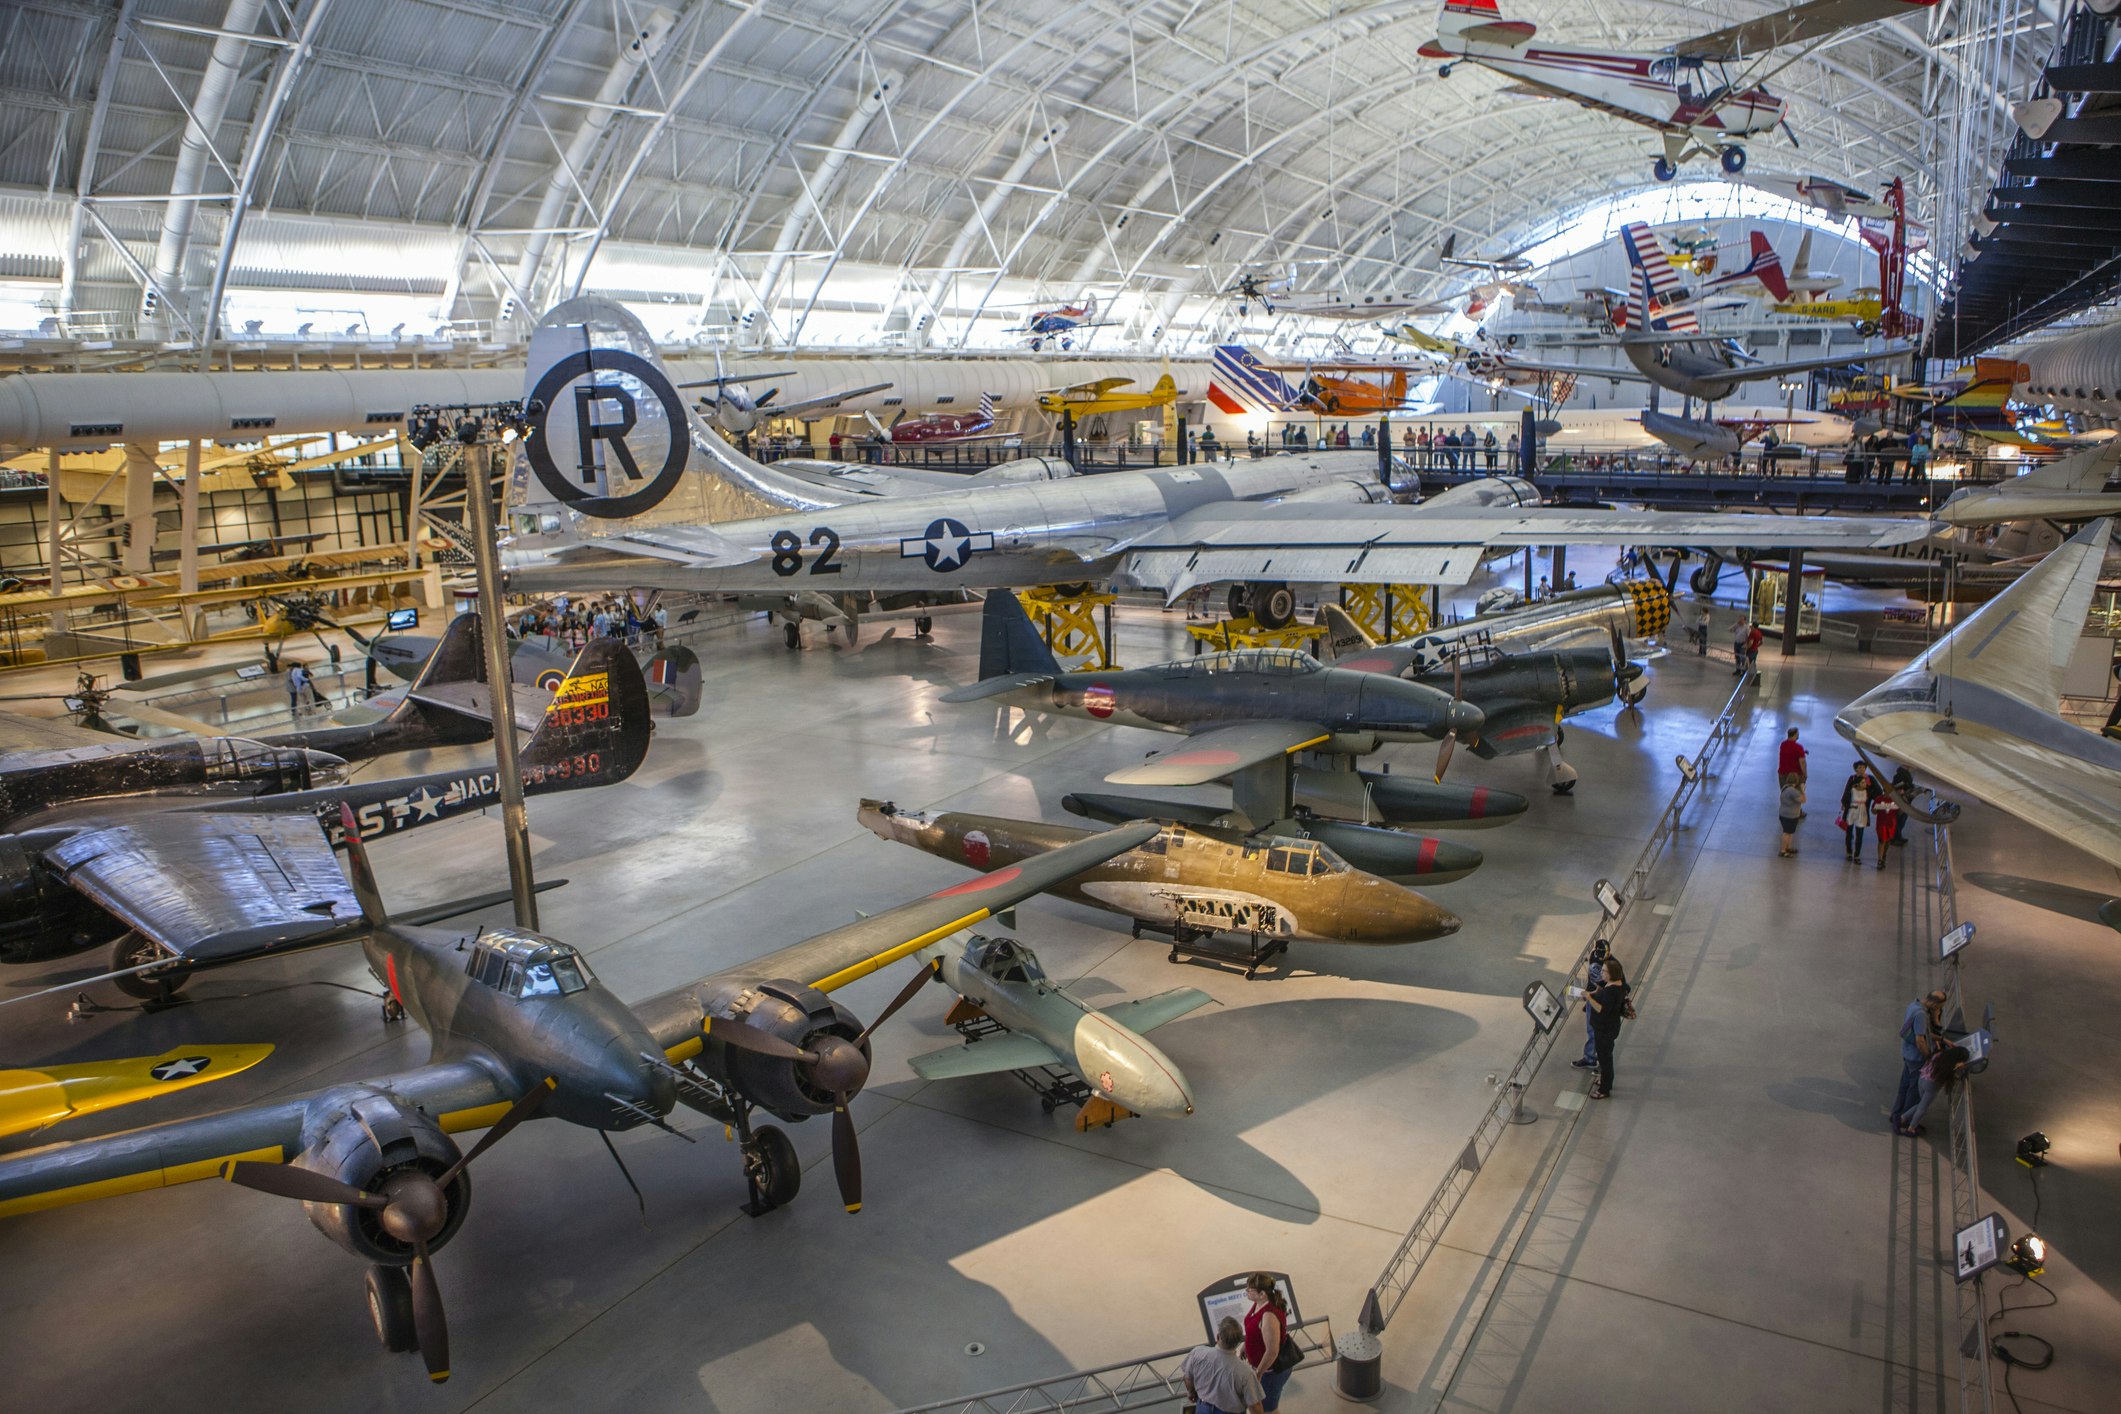 A huge aircraft hangar displaying many different types of plane, rocket and engine. People are following the walkways between exhibits